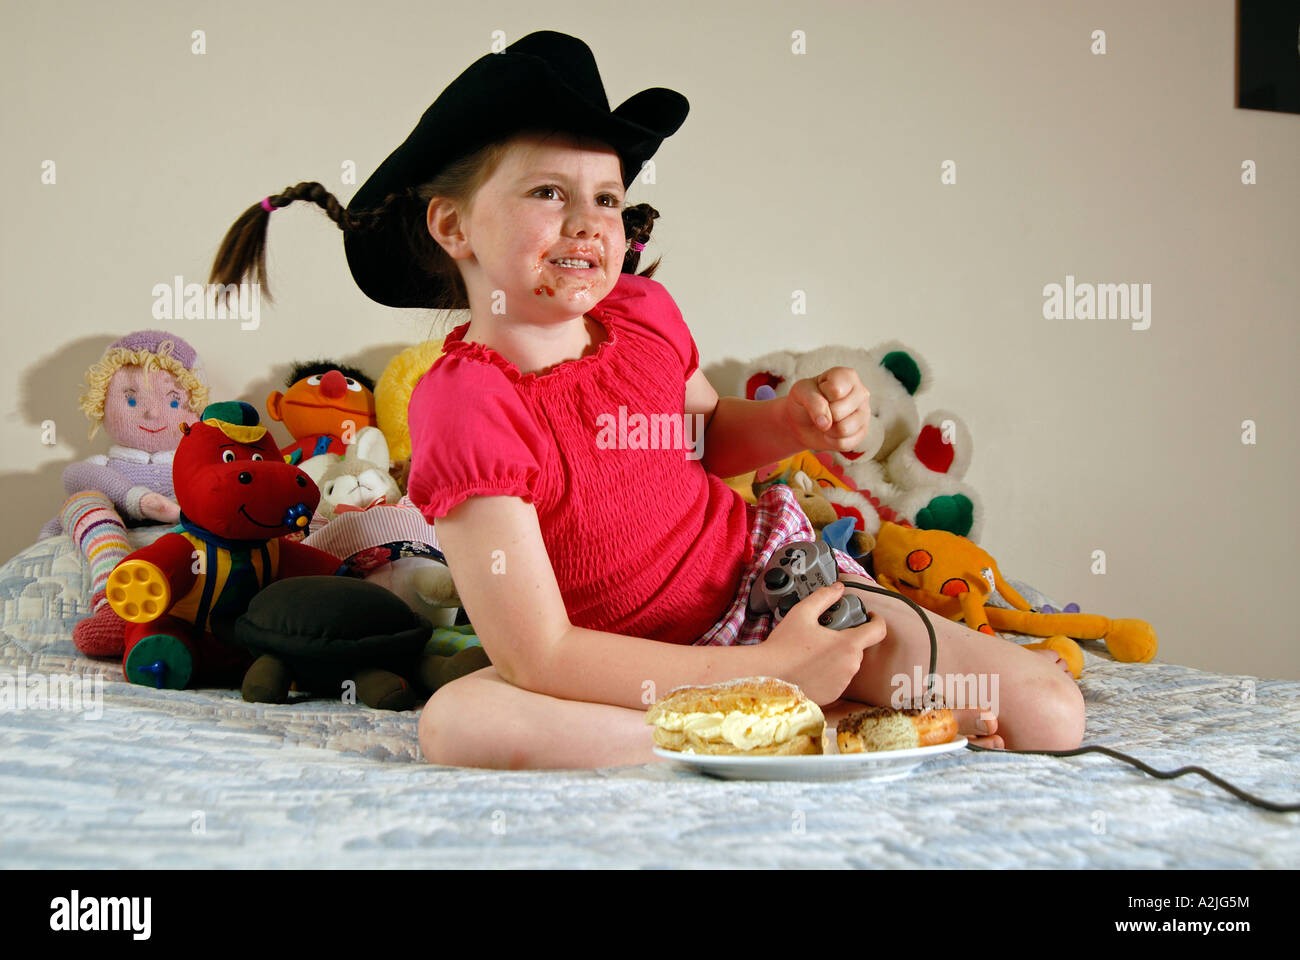 Girl in cowboy hat playing on a Sony Playstation and eating cakes. Stock Photo